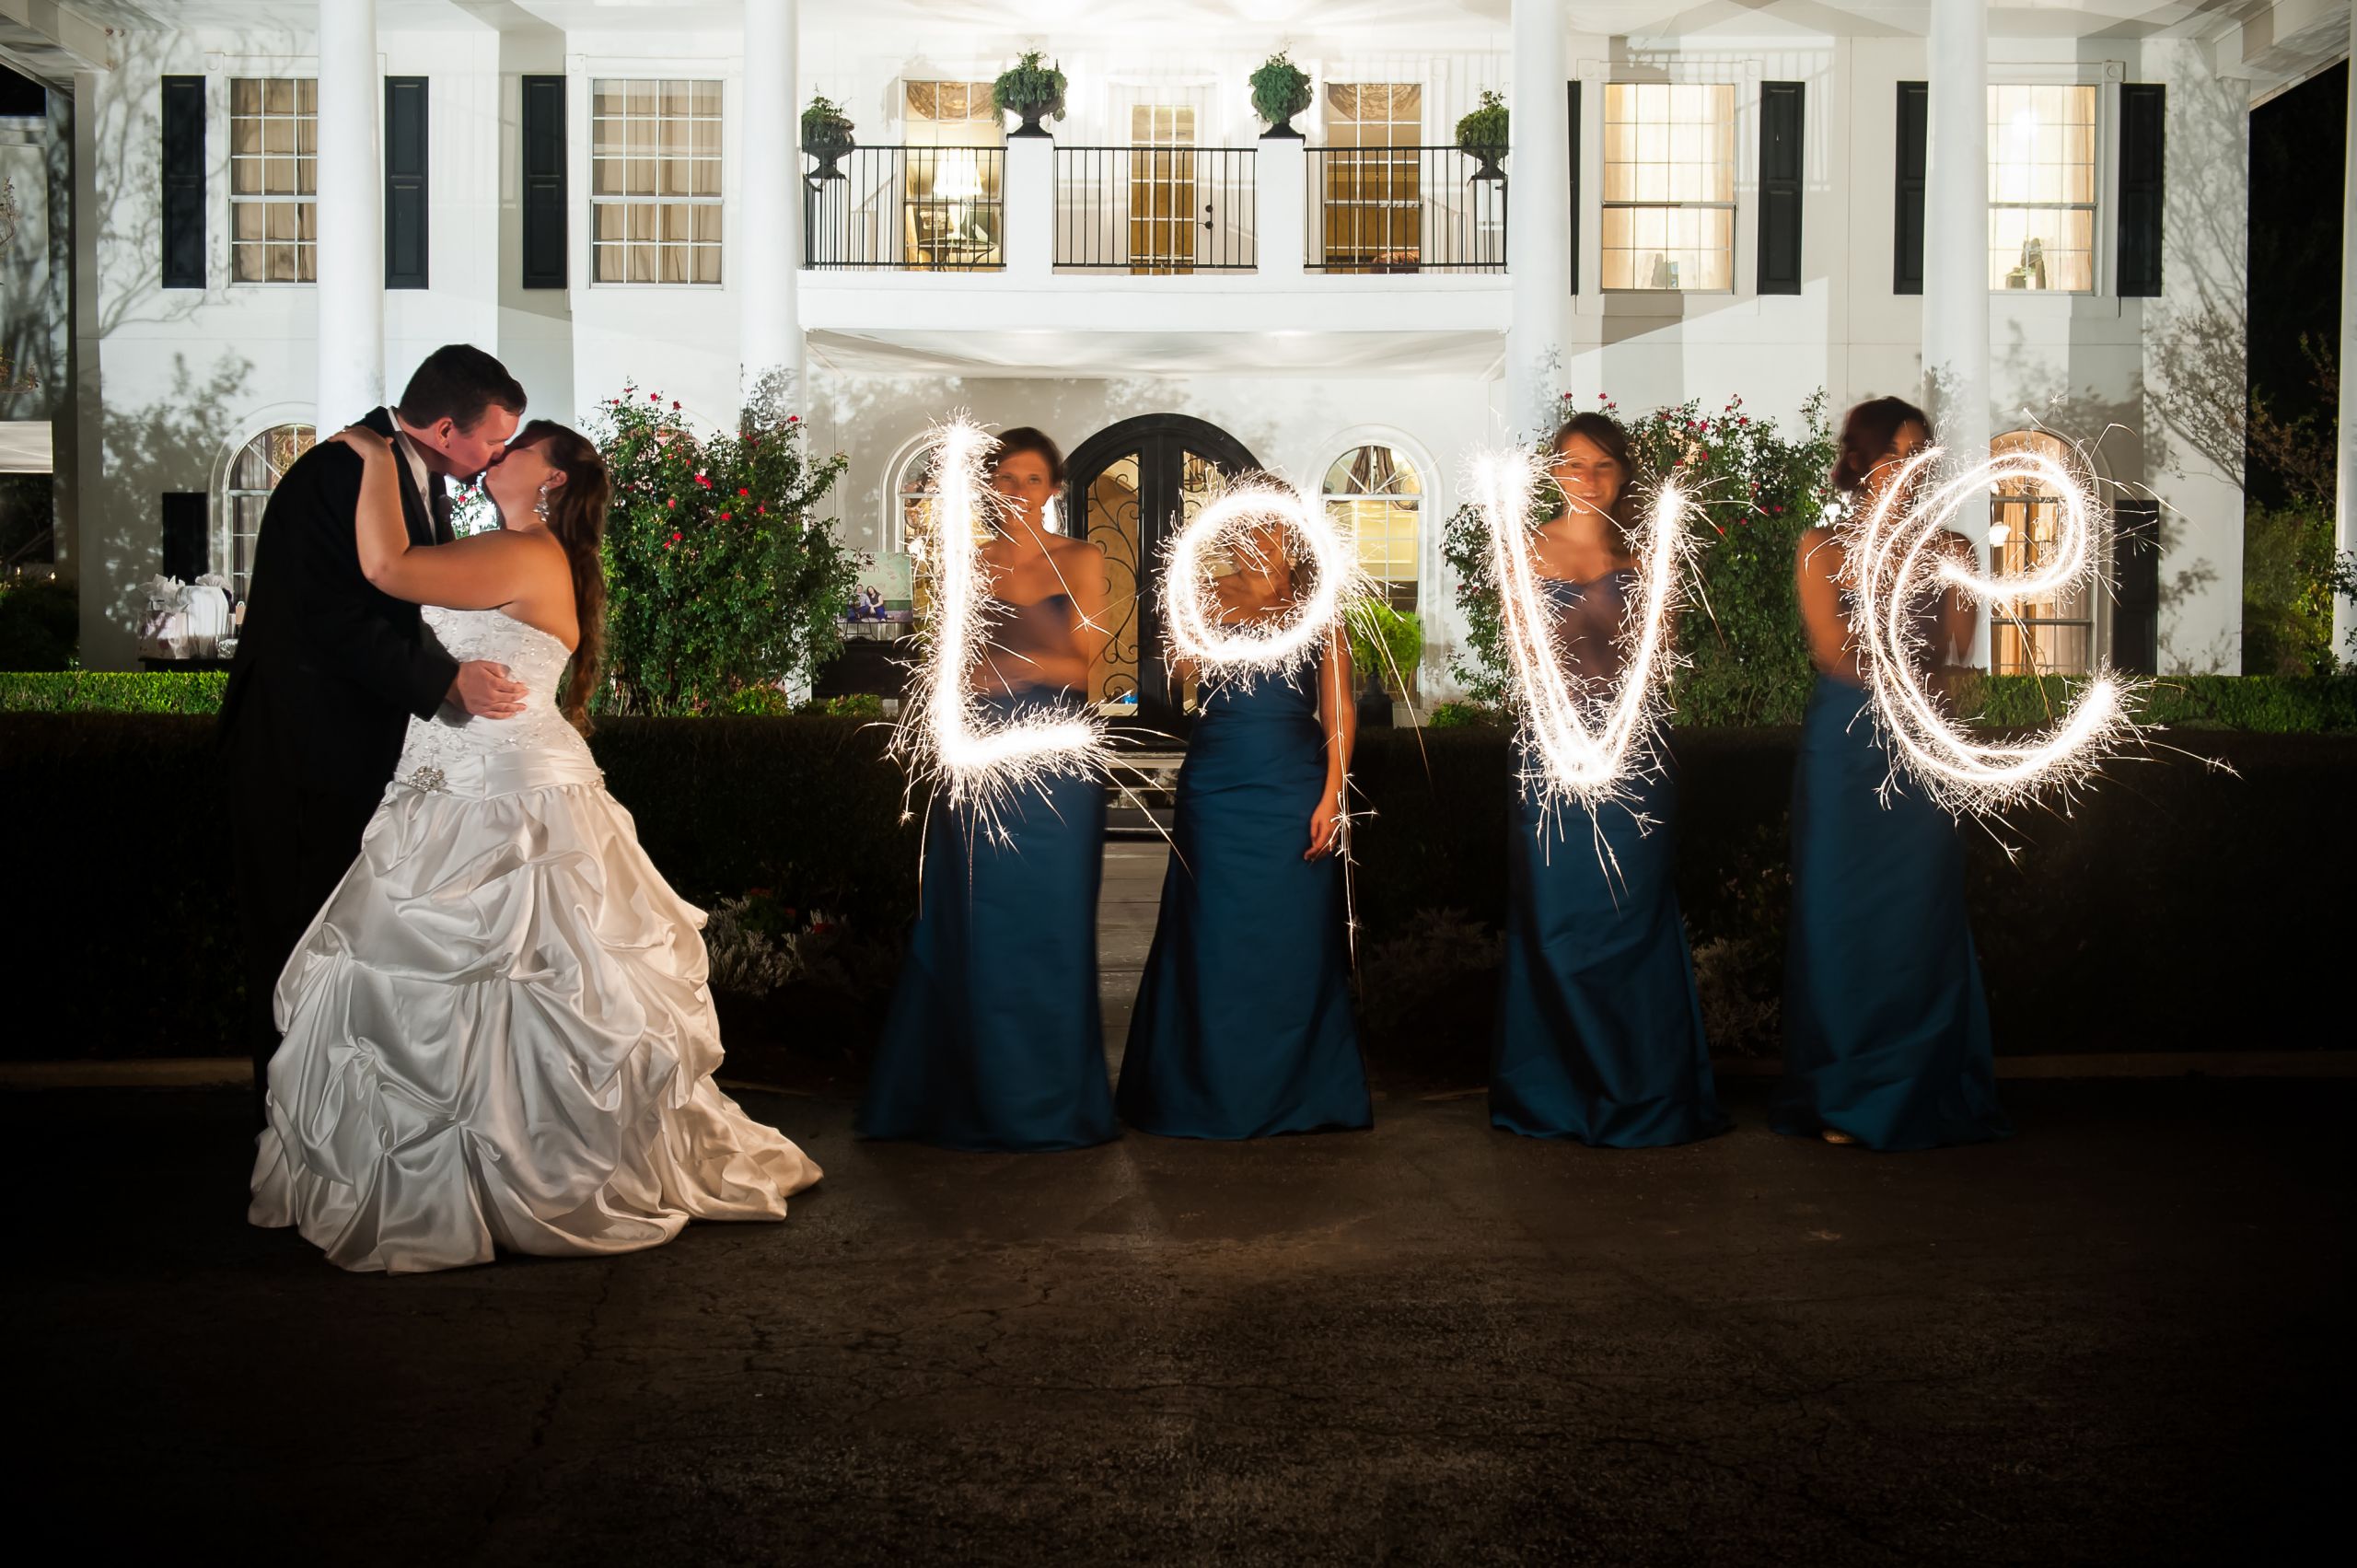 How To Use Sparklers At A Wedding
 How to Use Wedding Sparklers